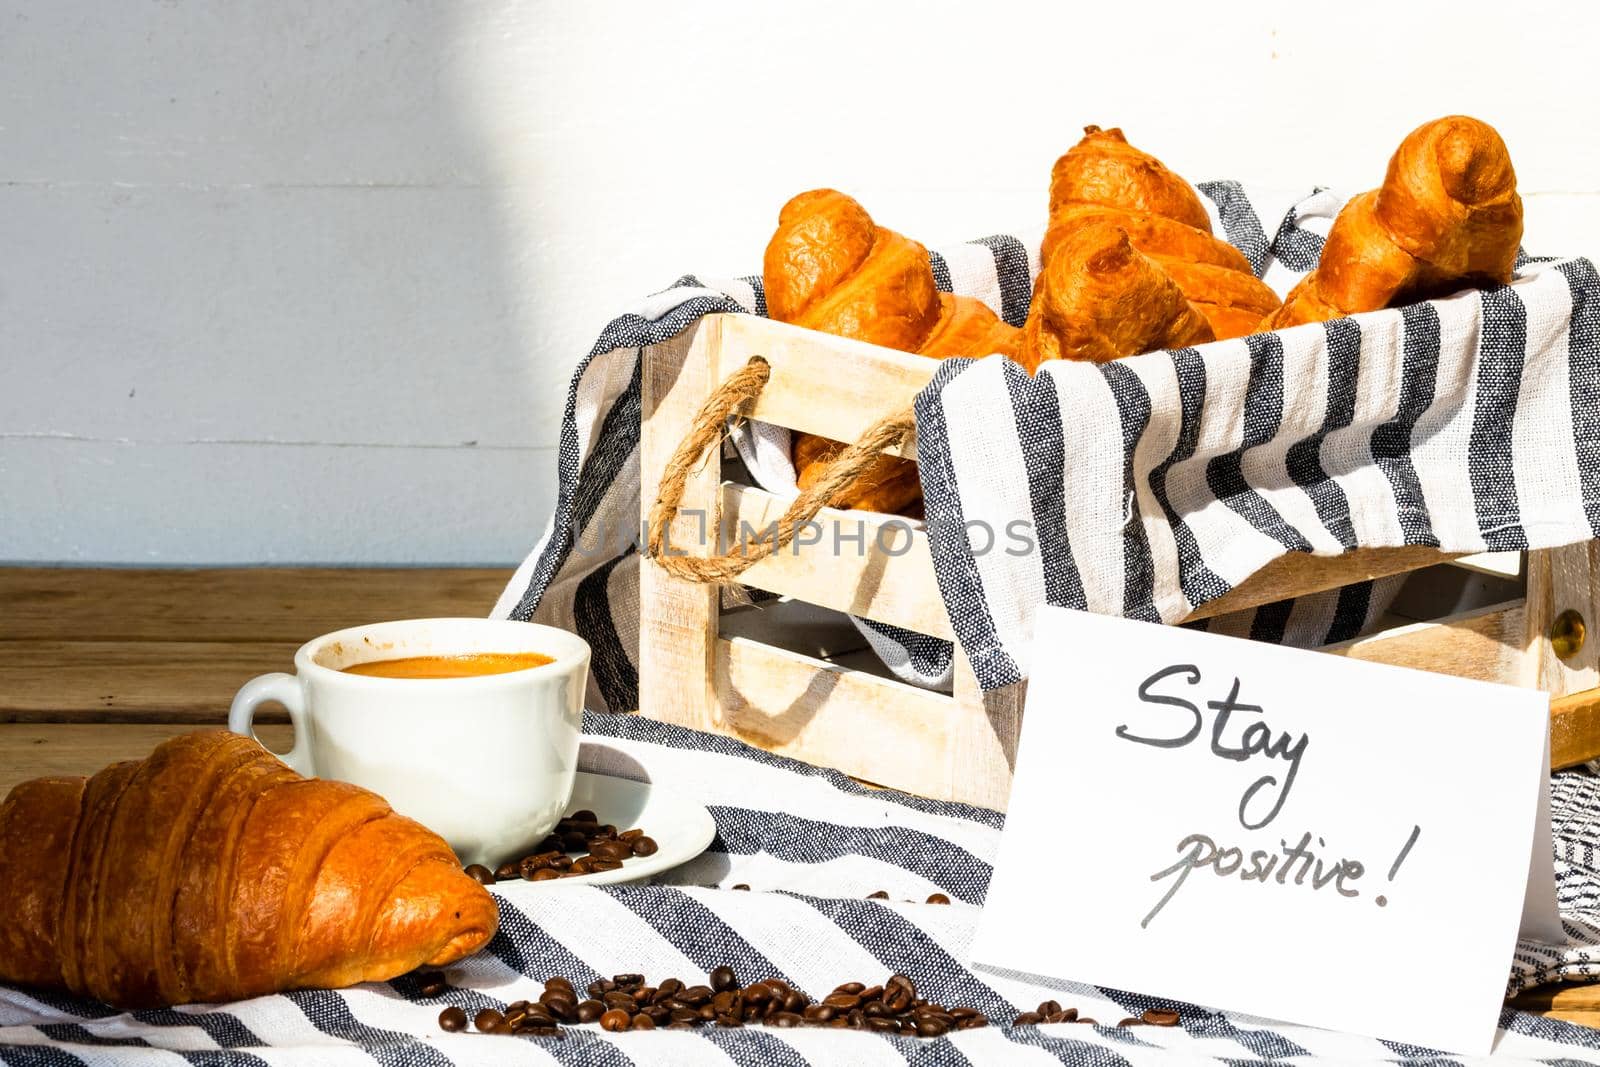 Coffee cup and buttered fresh French croissant on wooden crate. Food and breakfast concept. Morning message “stay positive” on white board